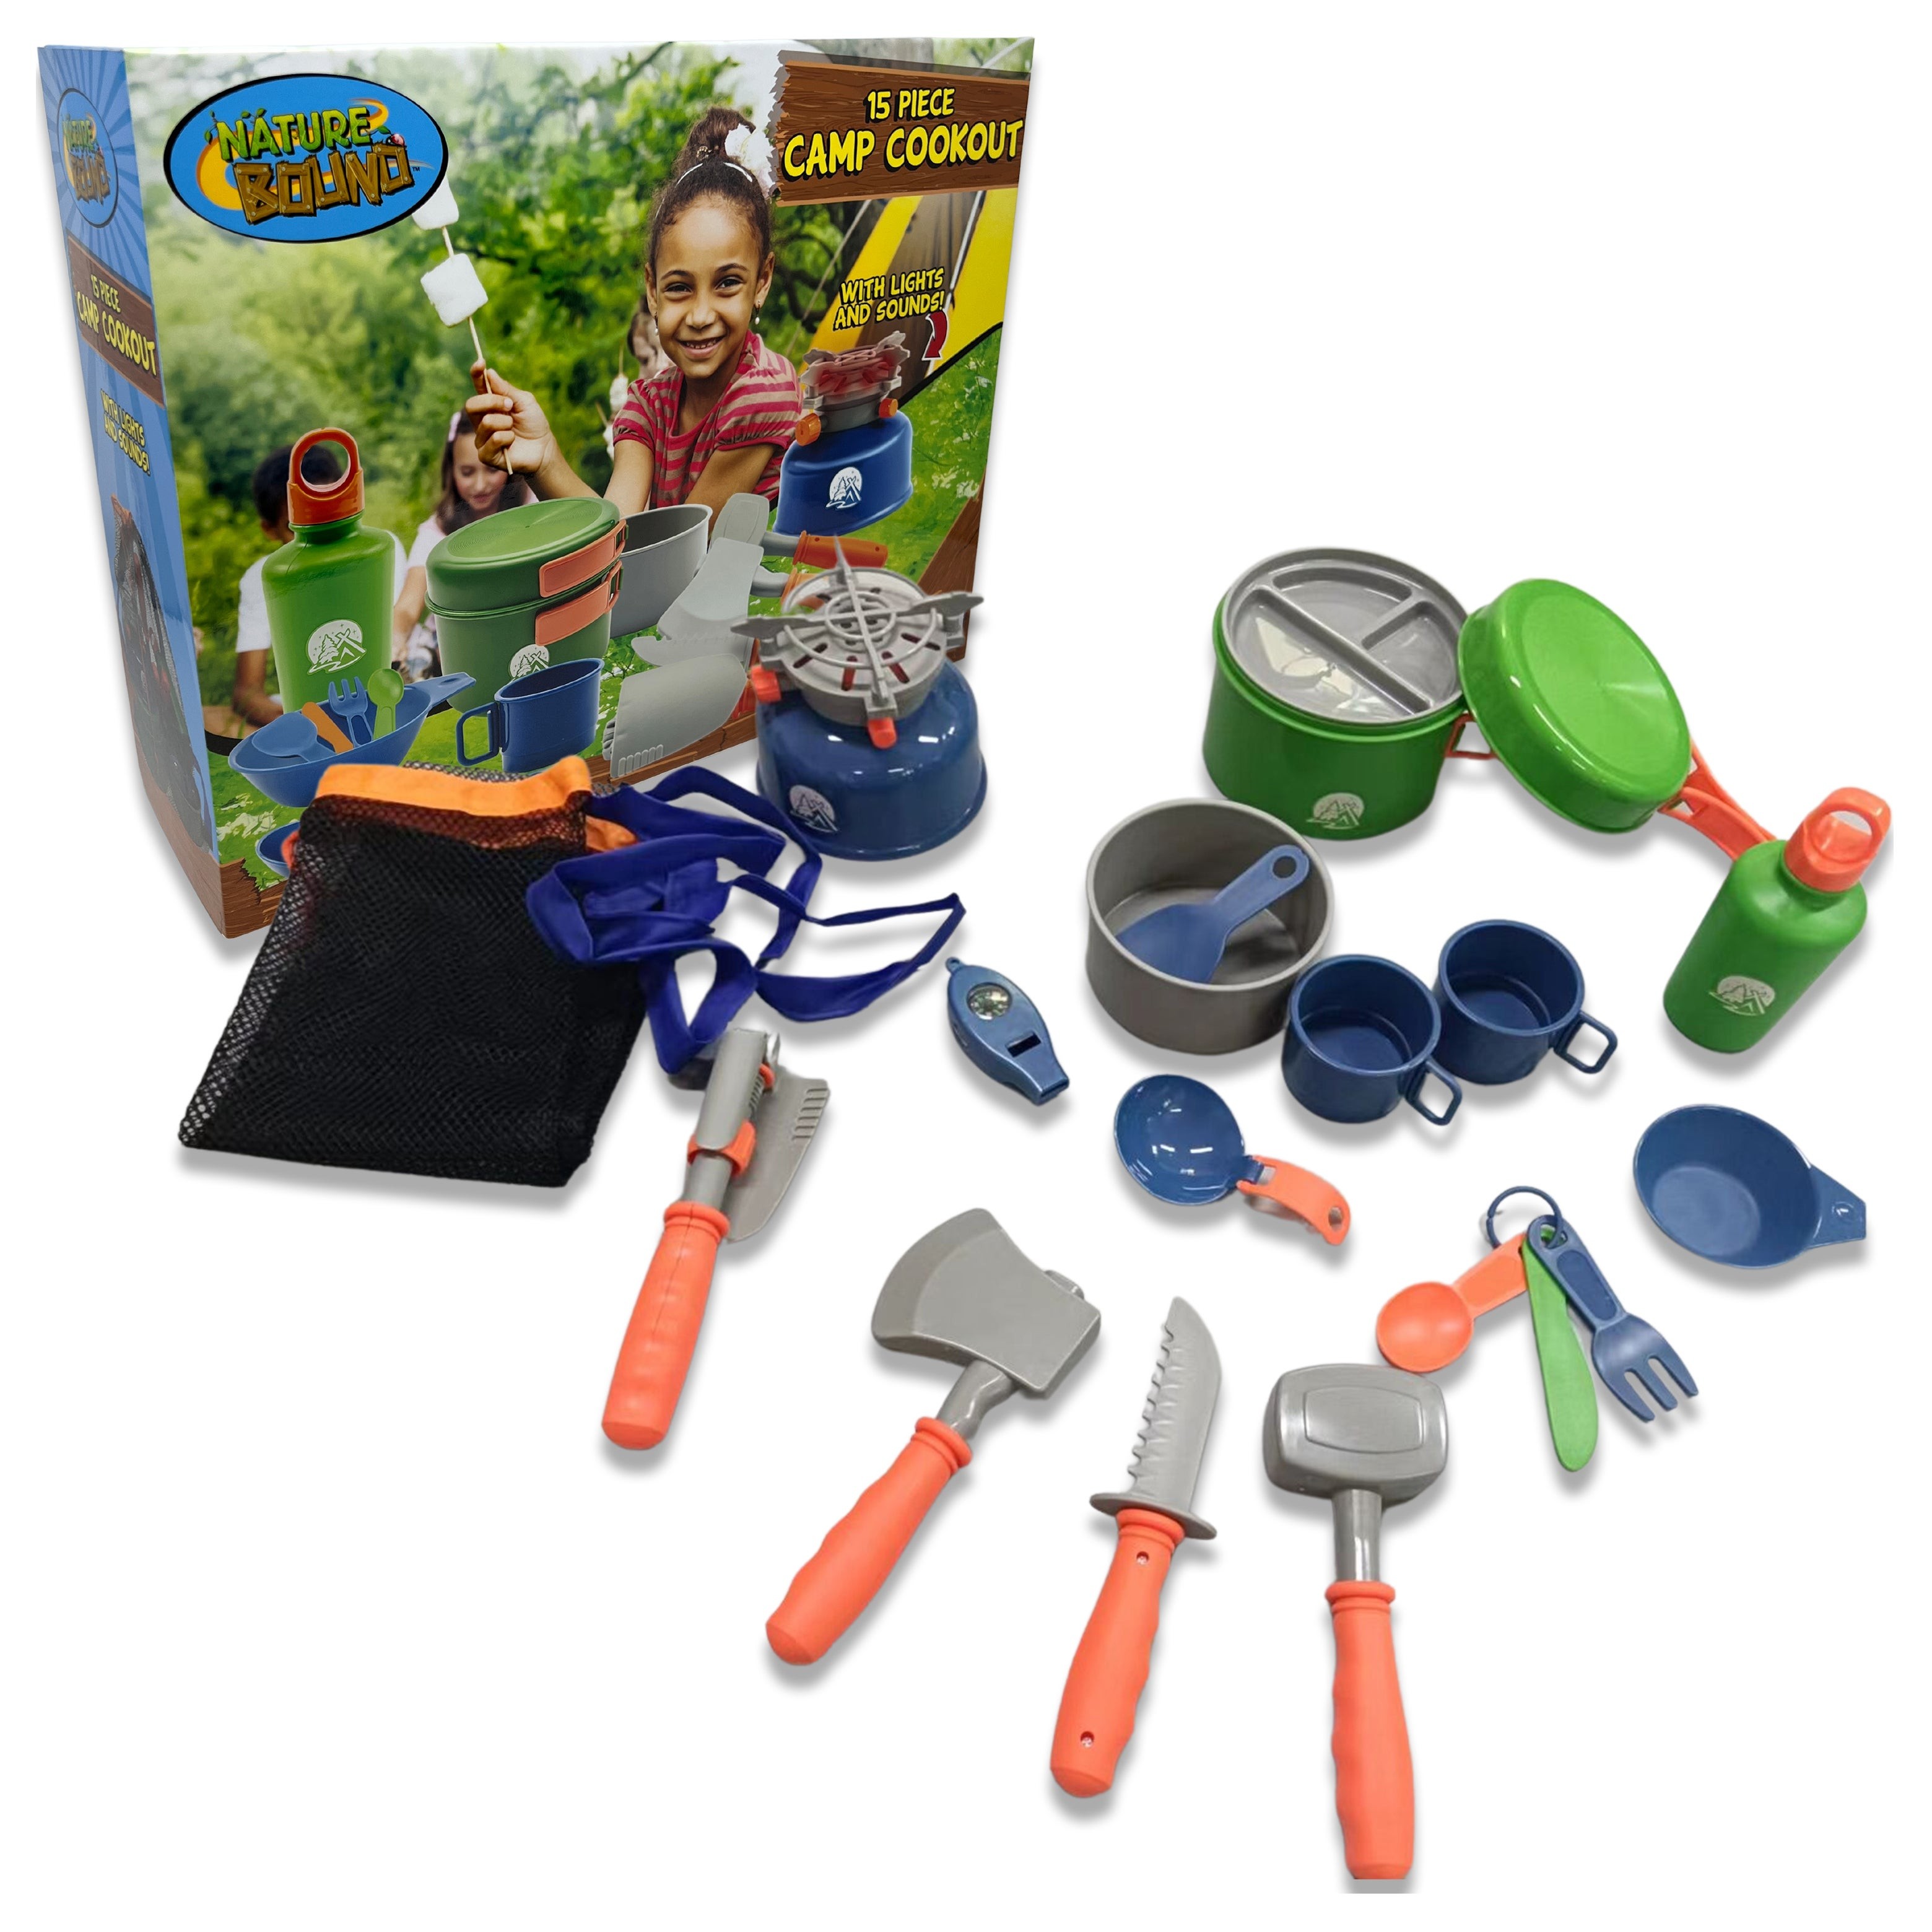 15pc Toy Camp Cookout Set Ages 3+ Years